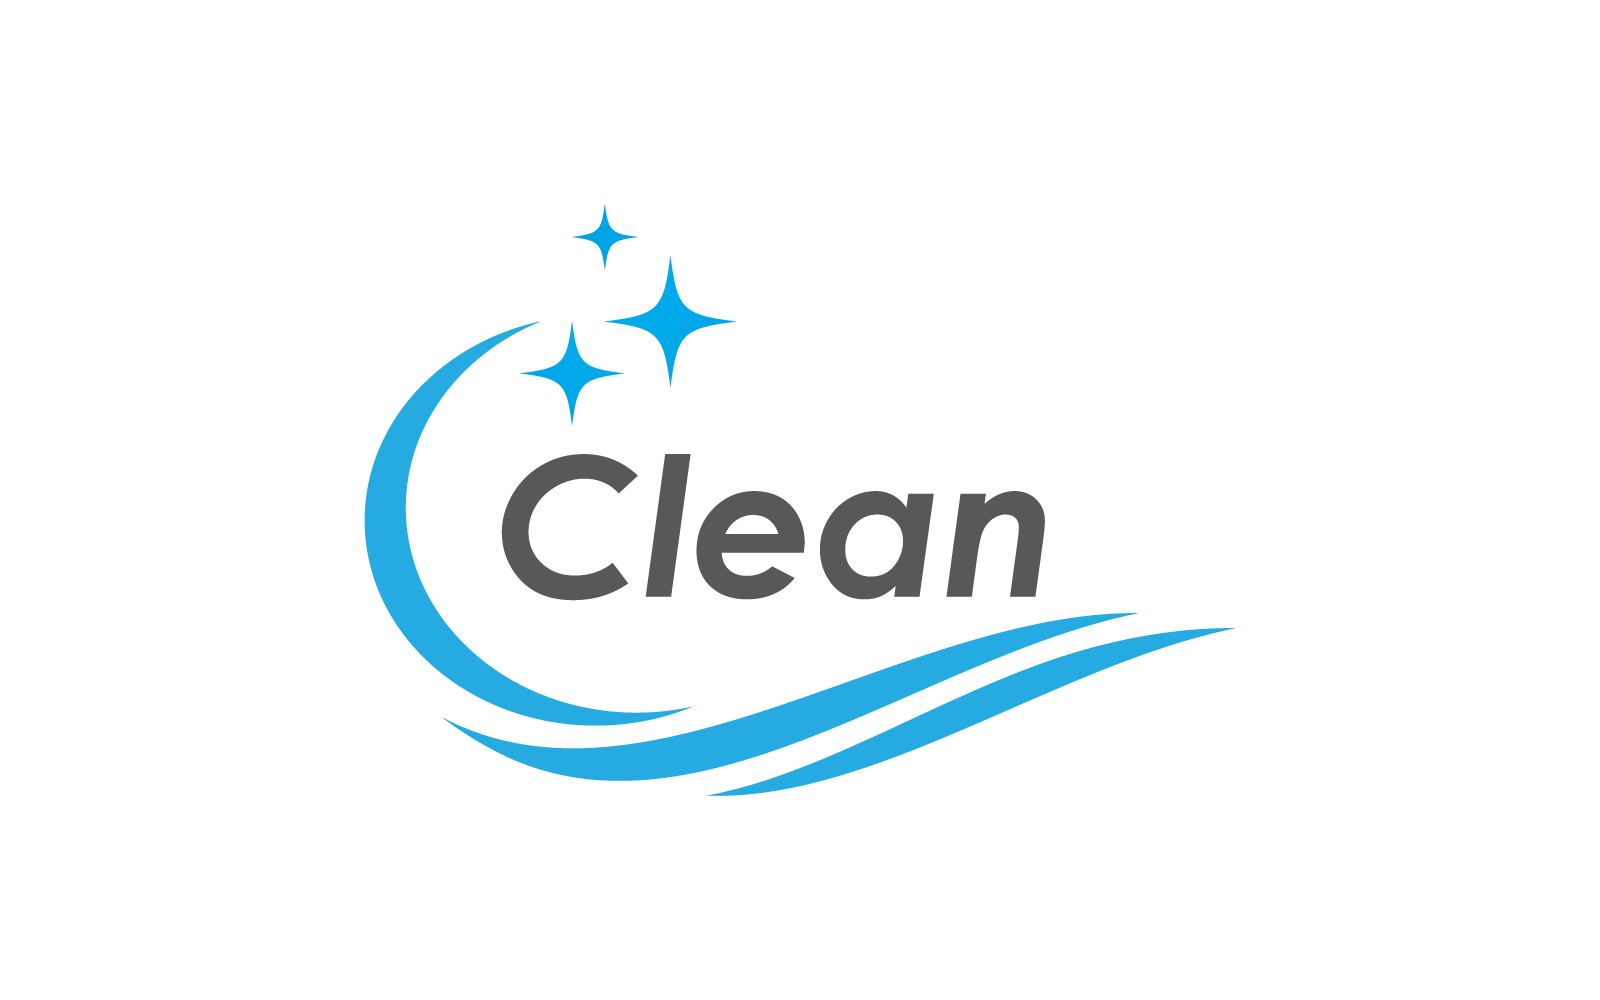 Cleaning logo and symbol illustration vector